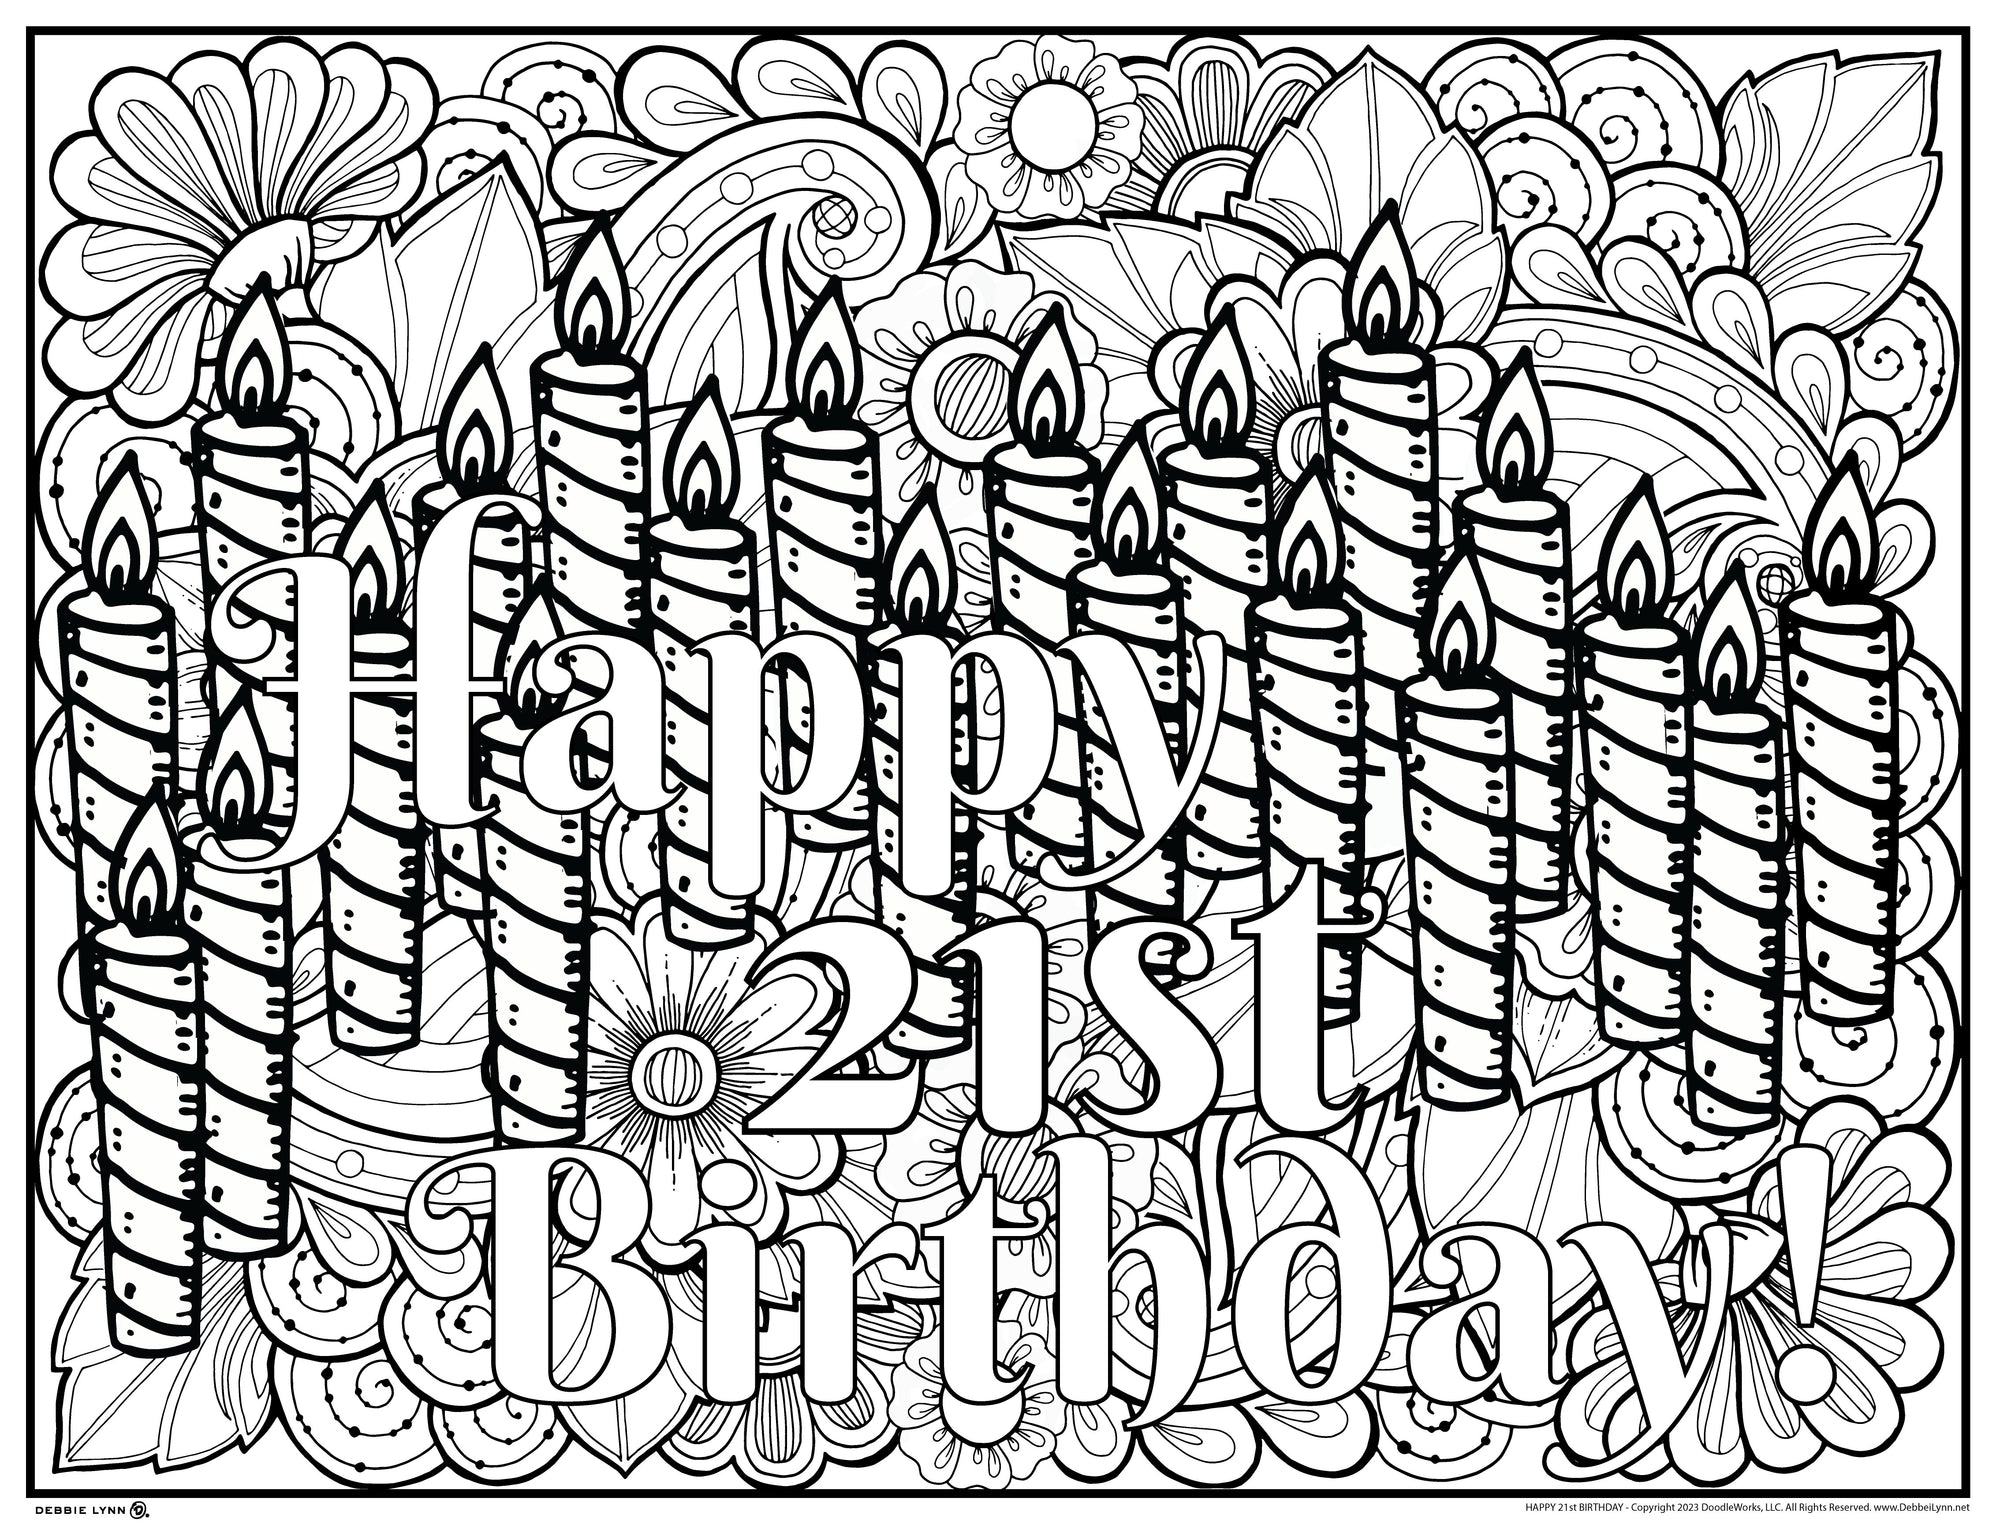 Happy 21 Birthday Personalized Giant Coloring Poster - Debbie Lynn